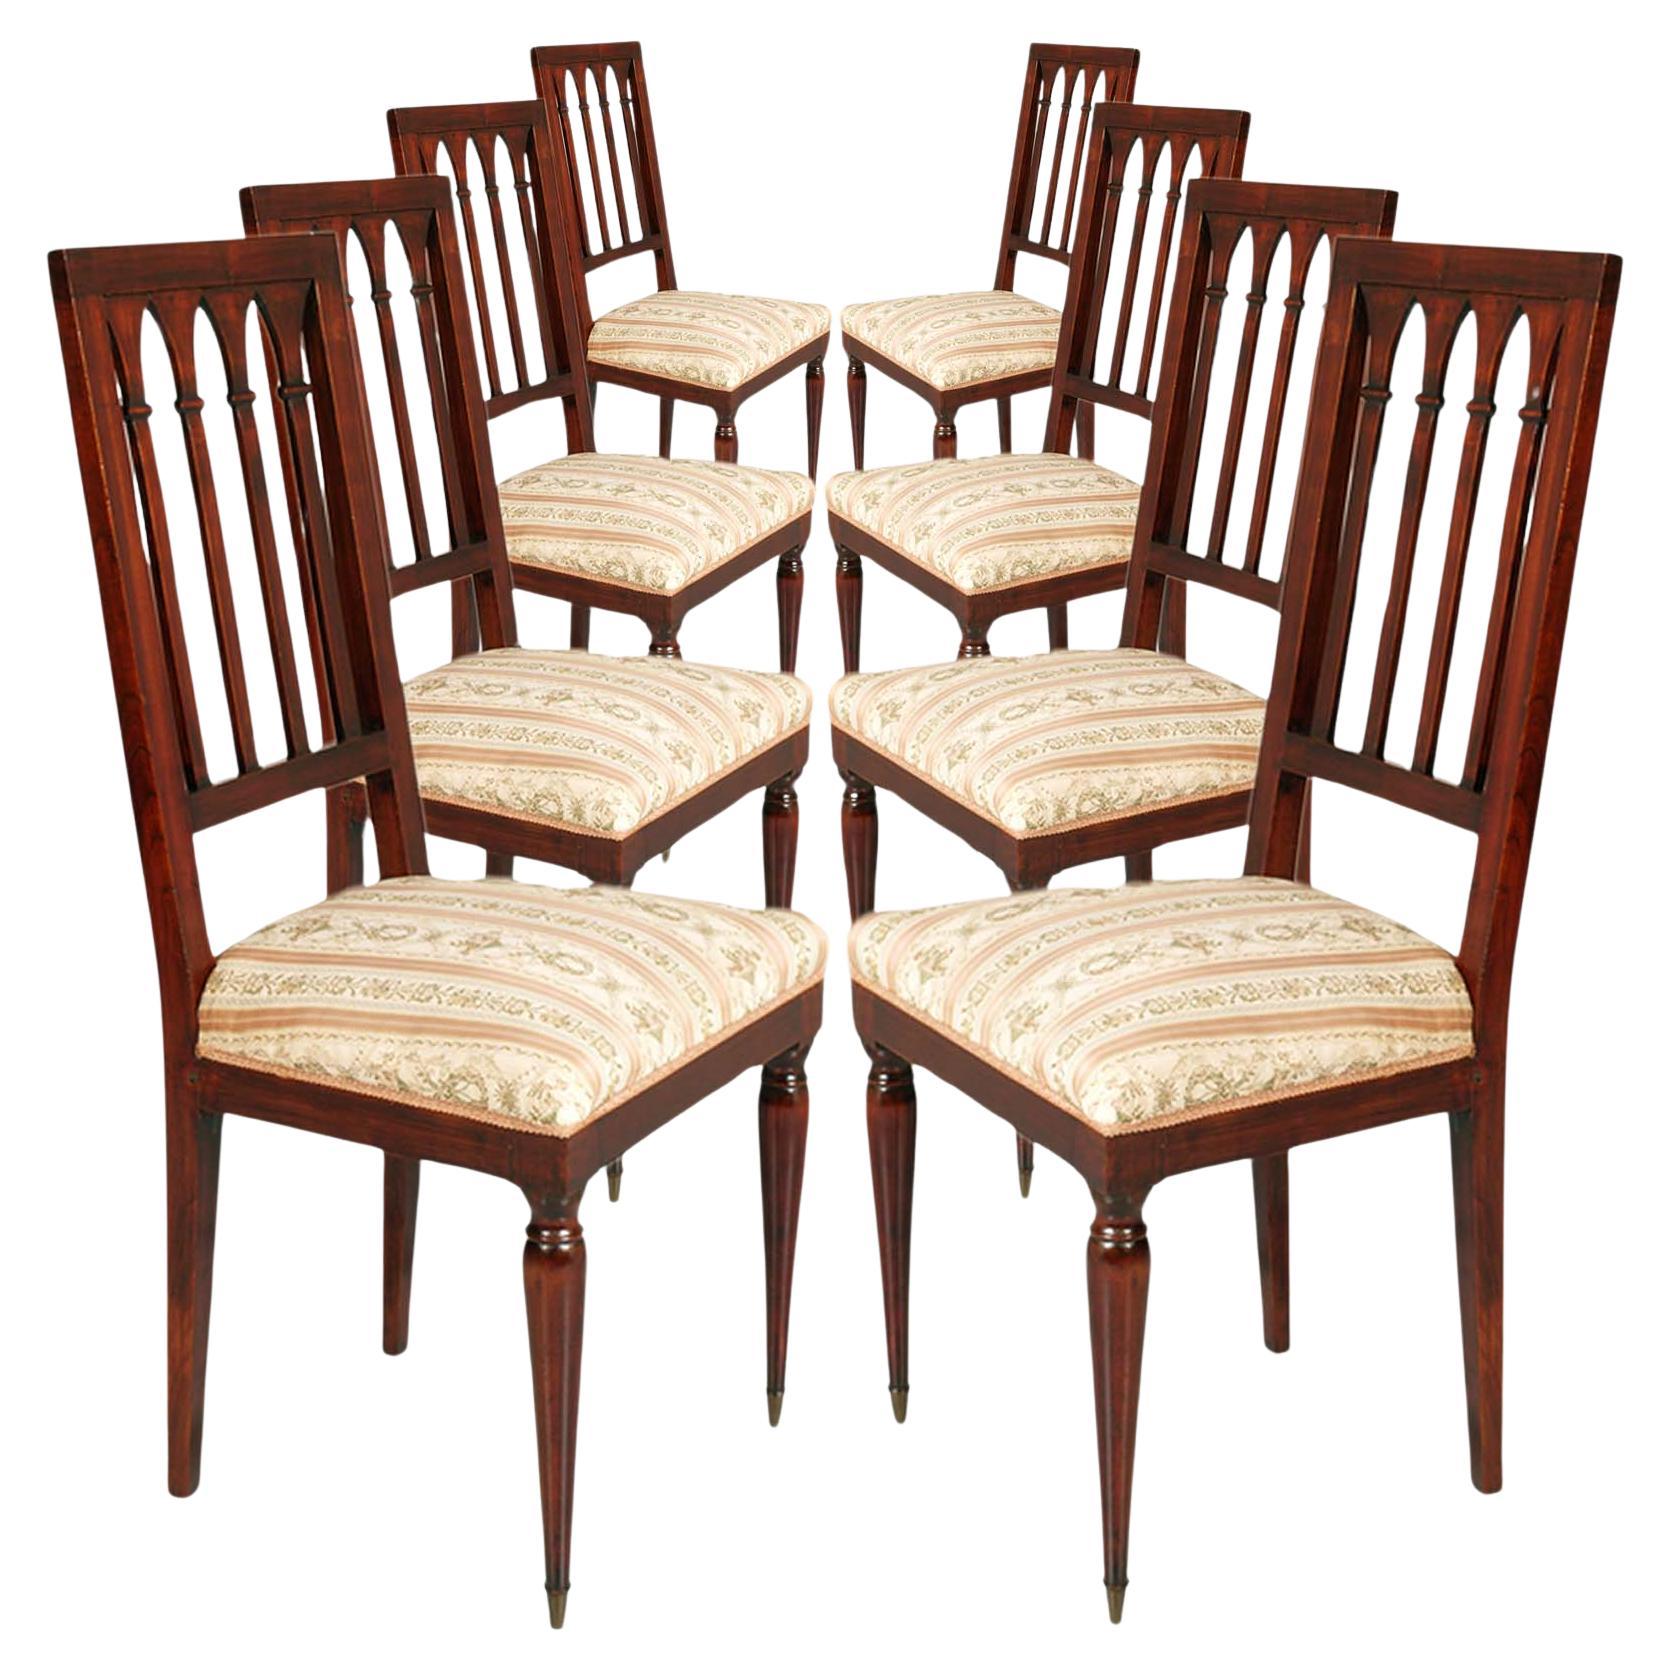 Eight French Gothic Style Chairs , Mahogany 1940s , Charles Dudouyt attributed